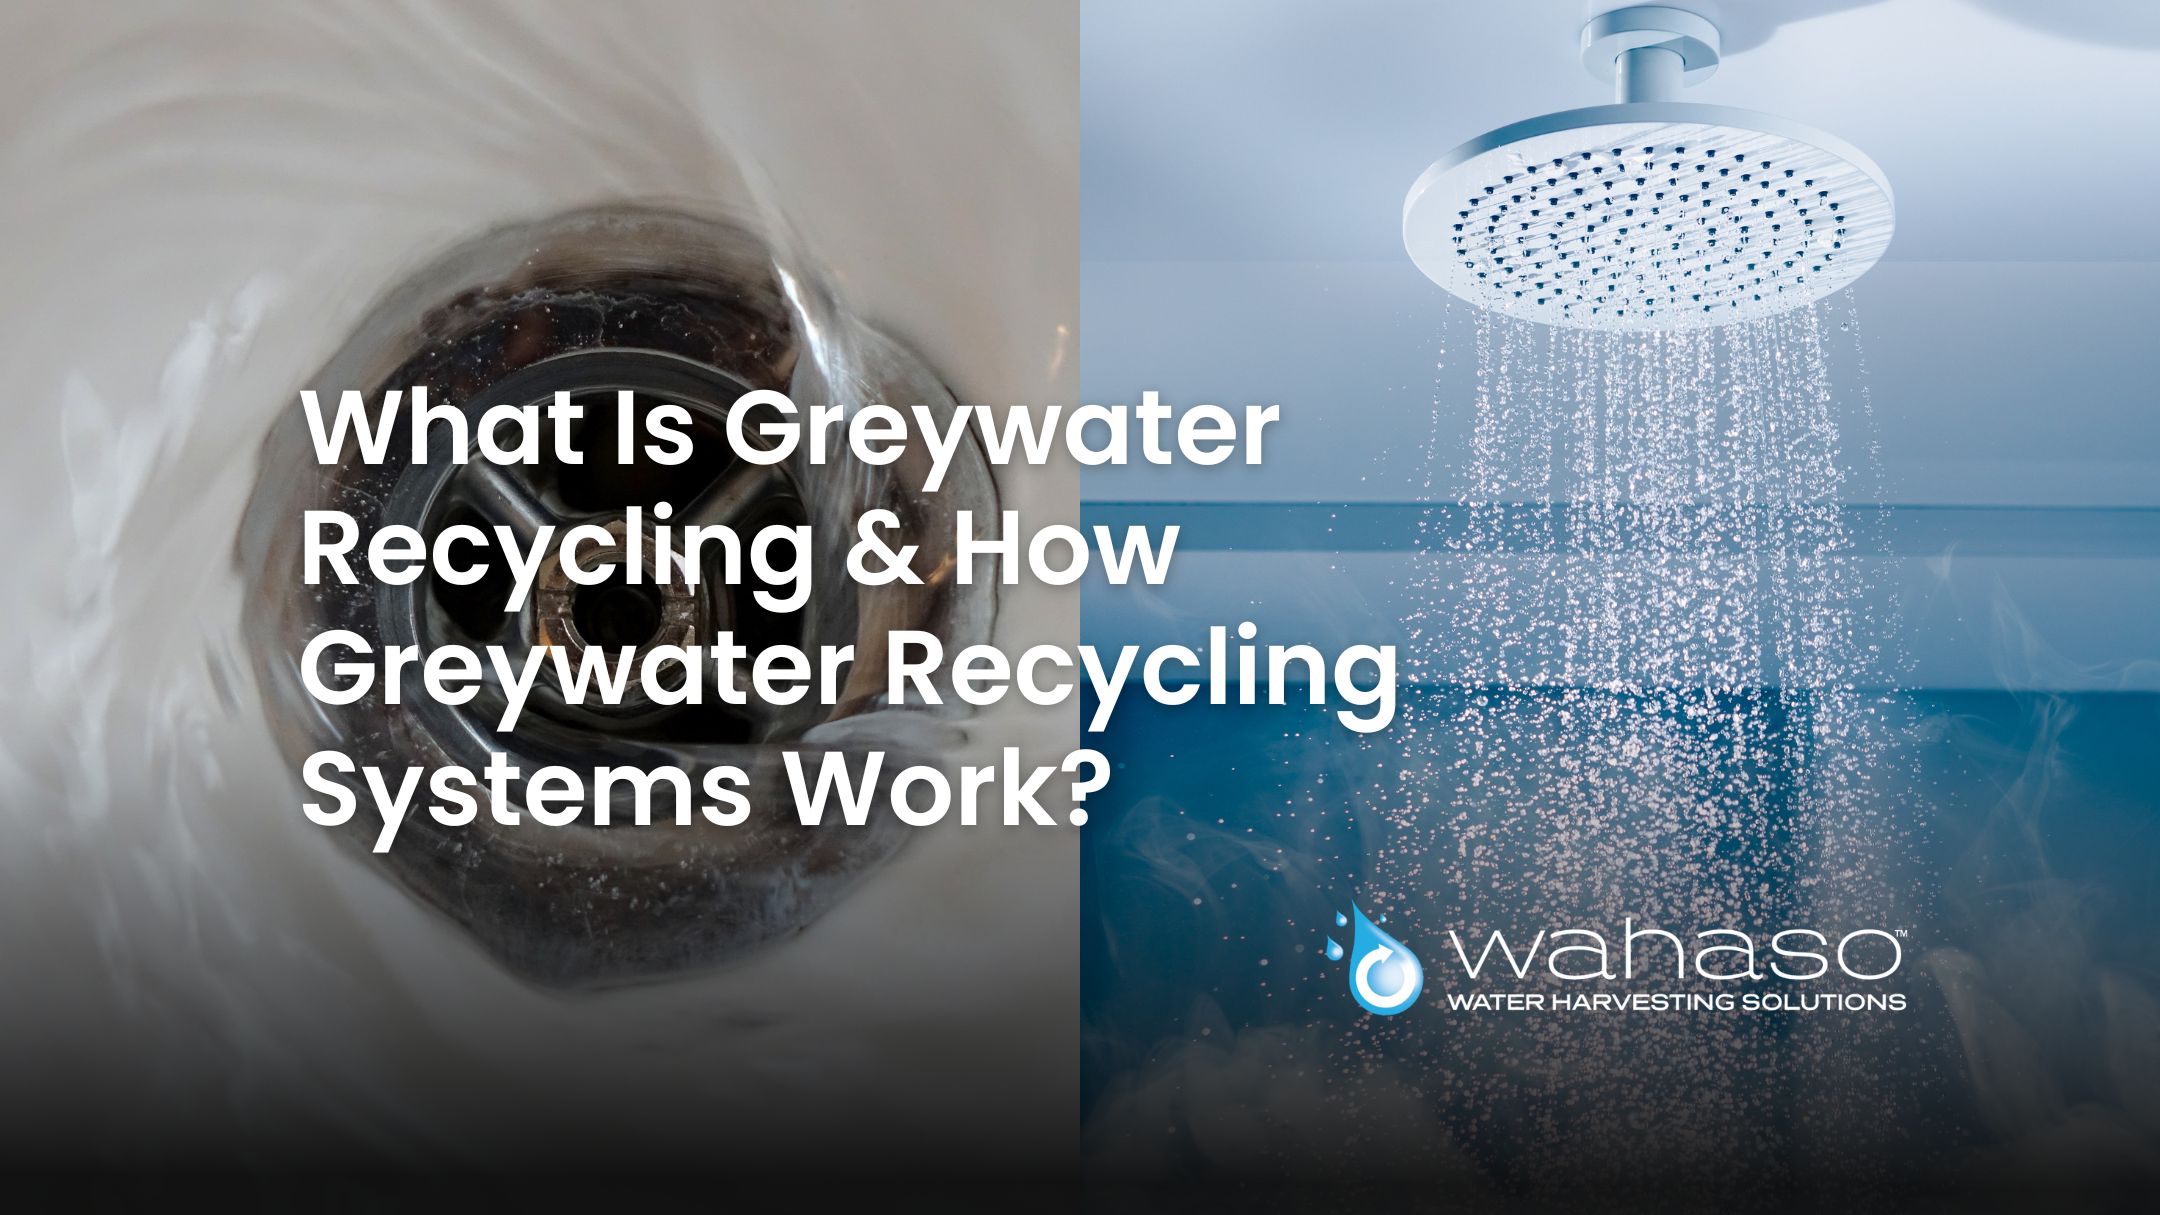 what-is-greywater-recycling-how-greywater-recycling-systems-work-2